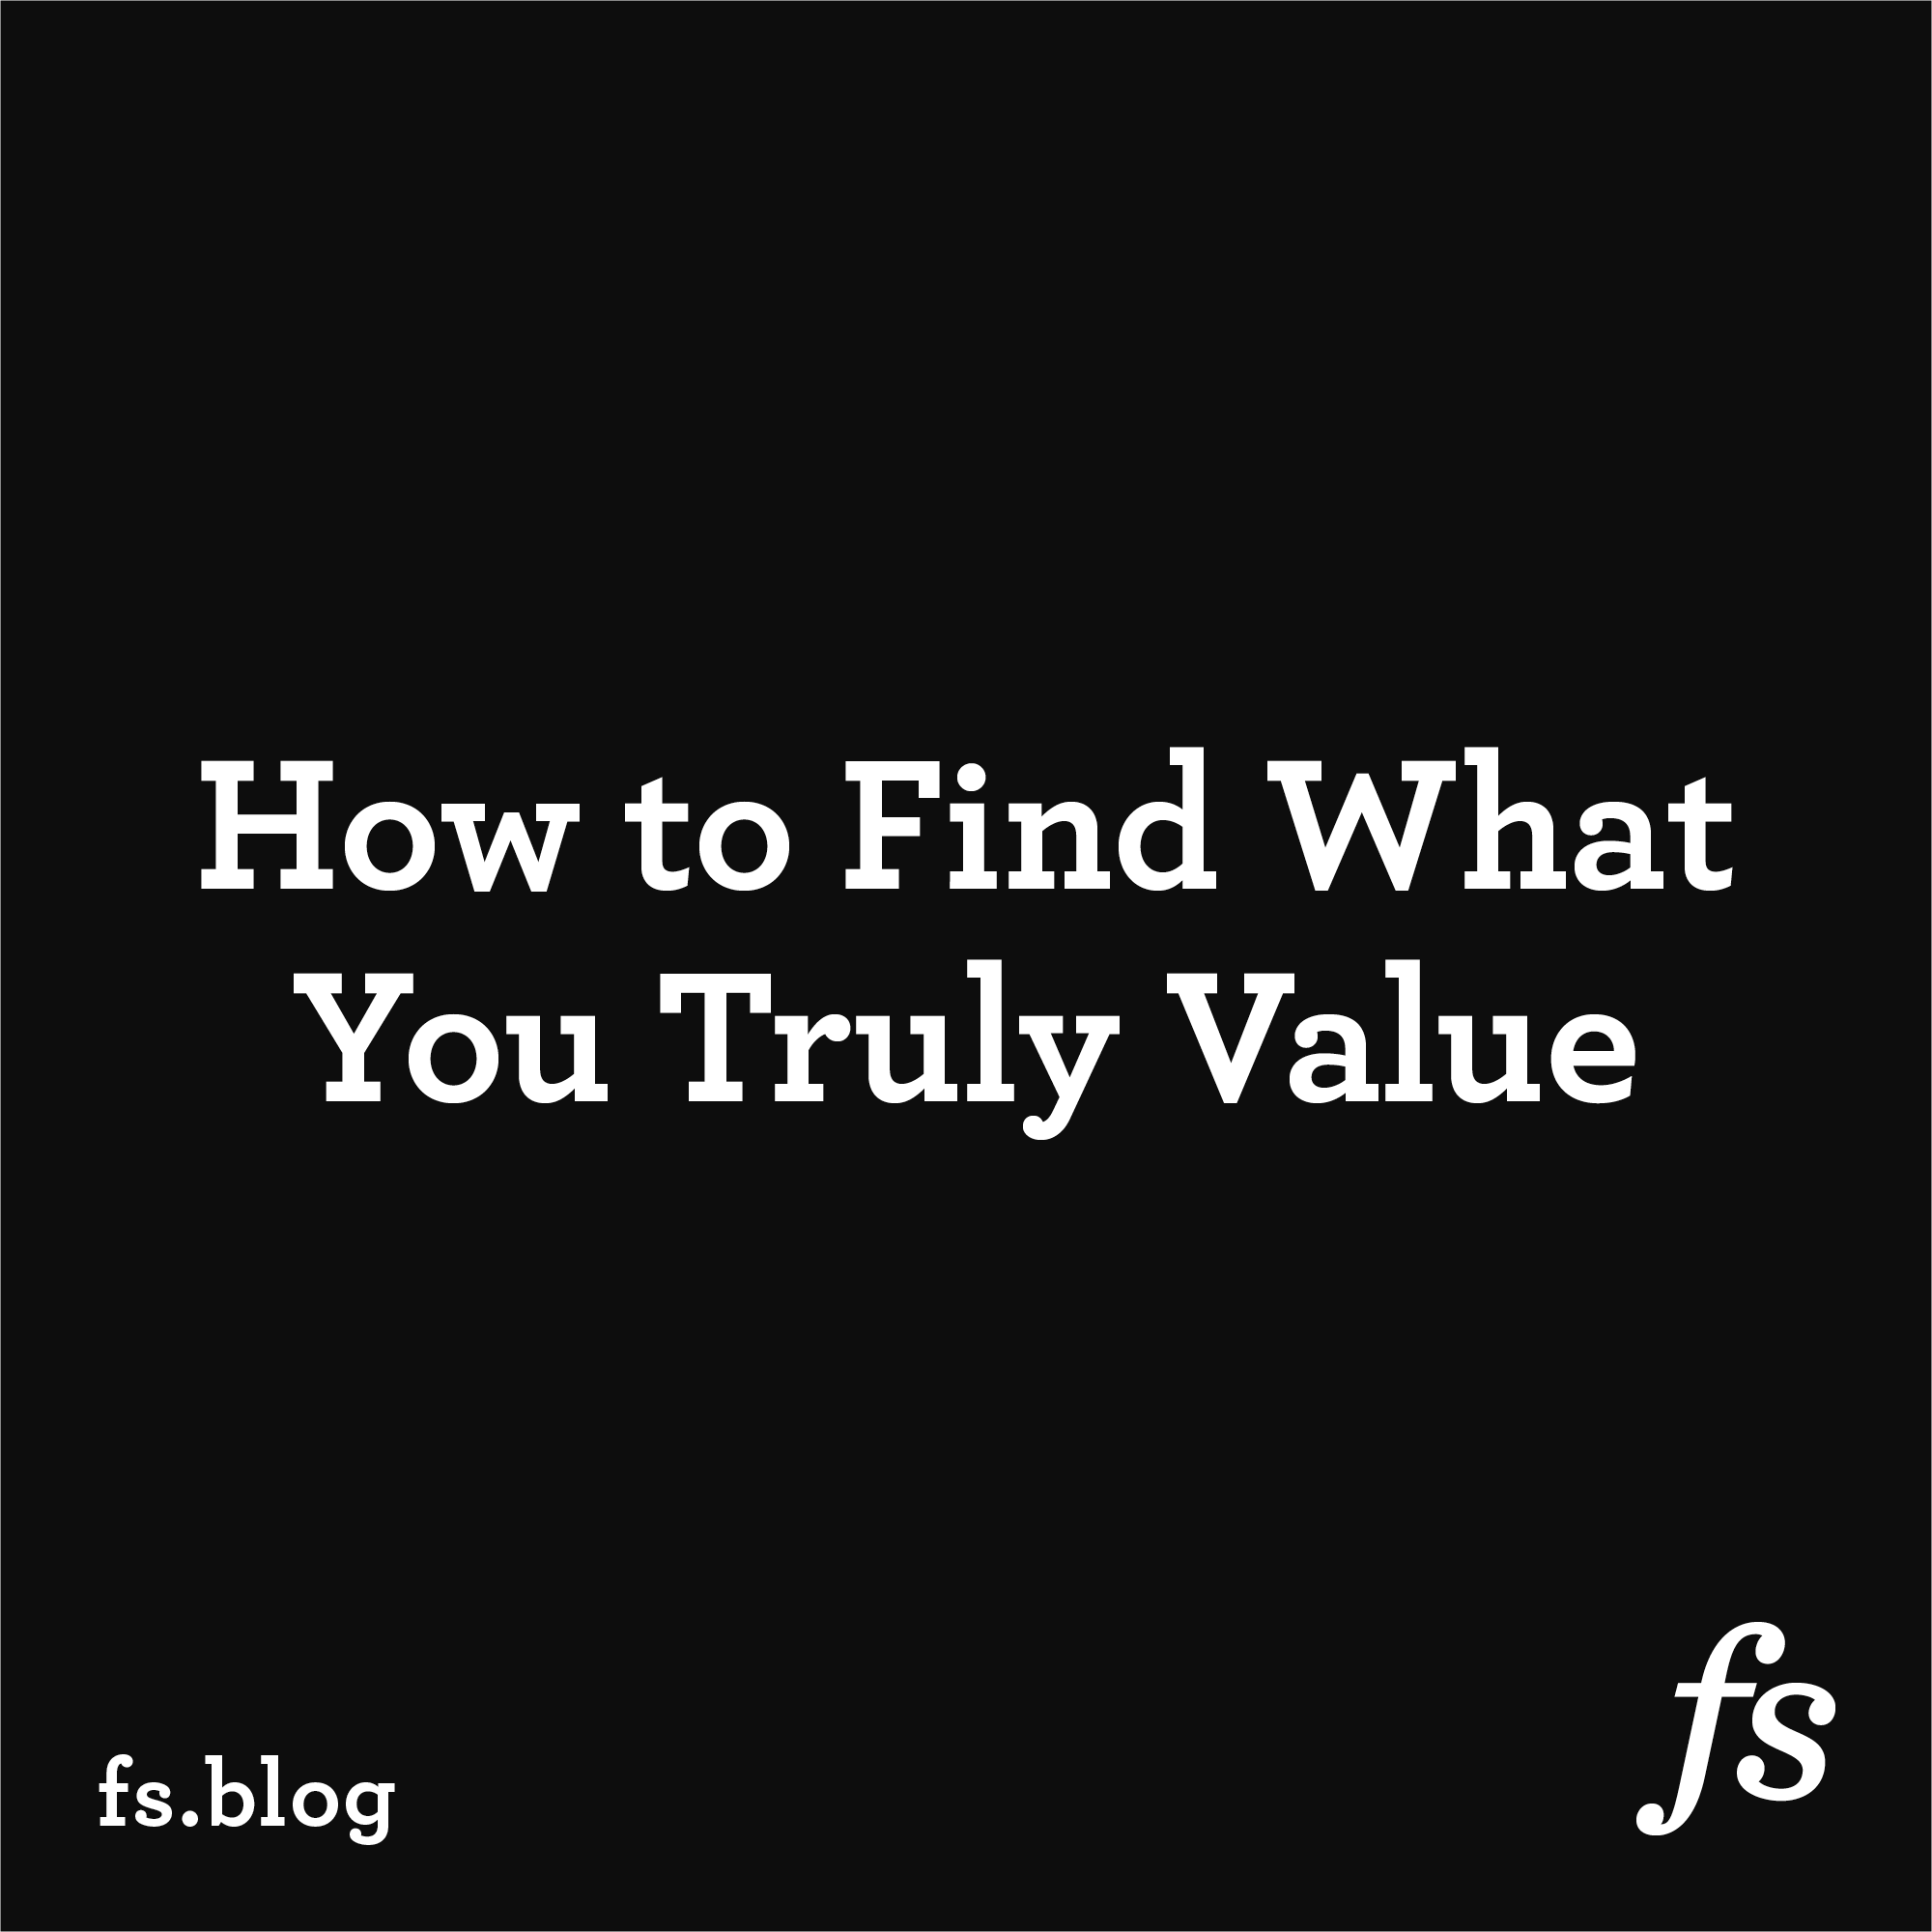 What You Truly Value